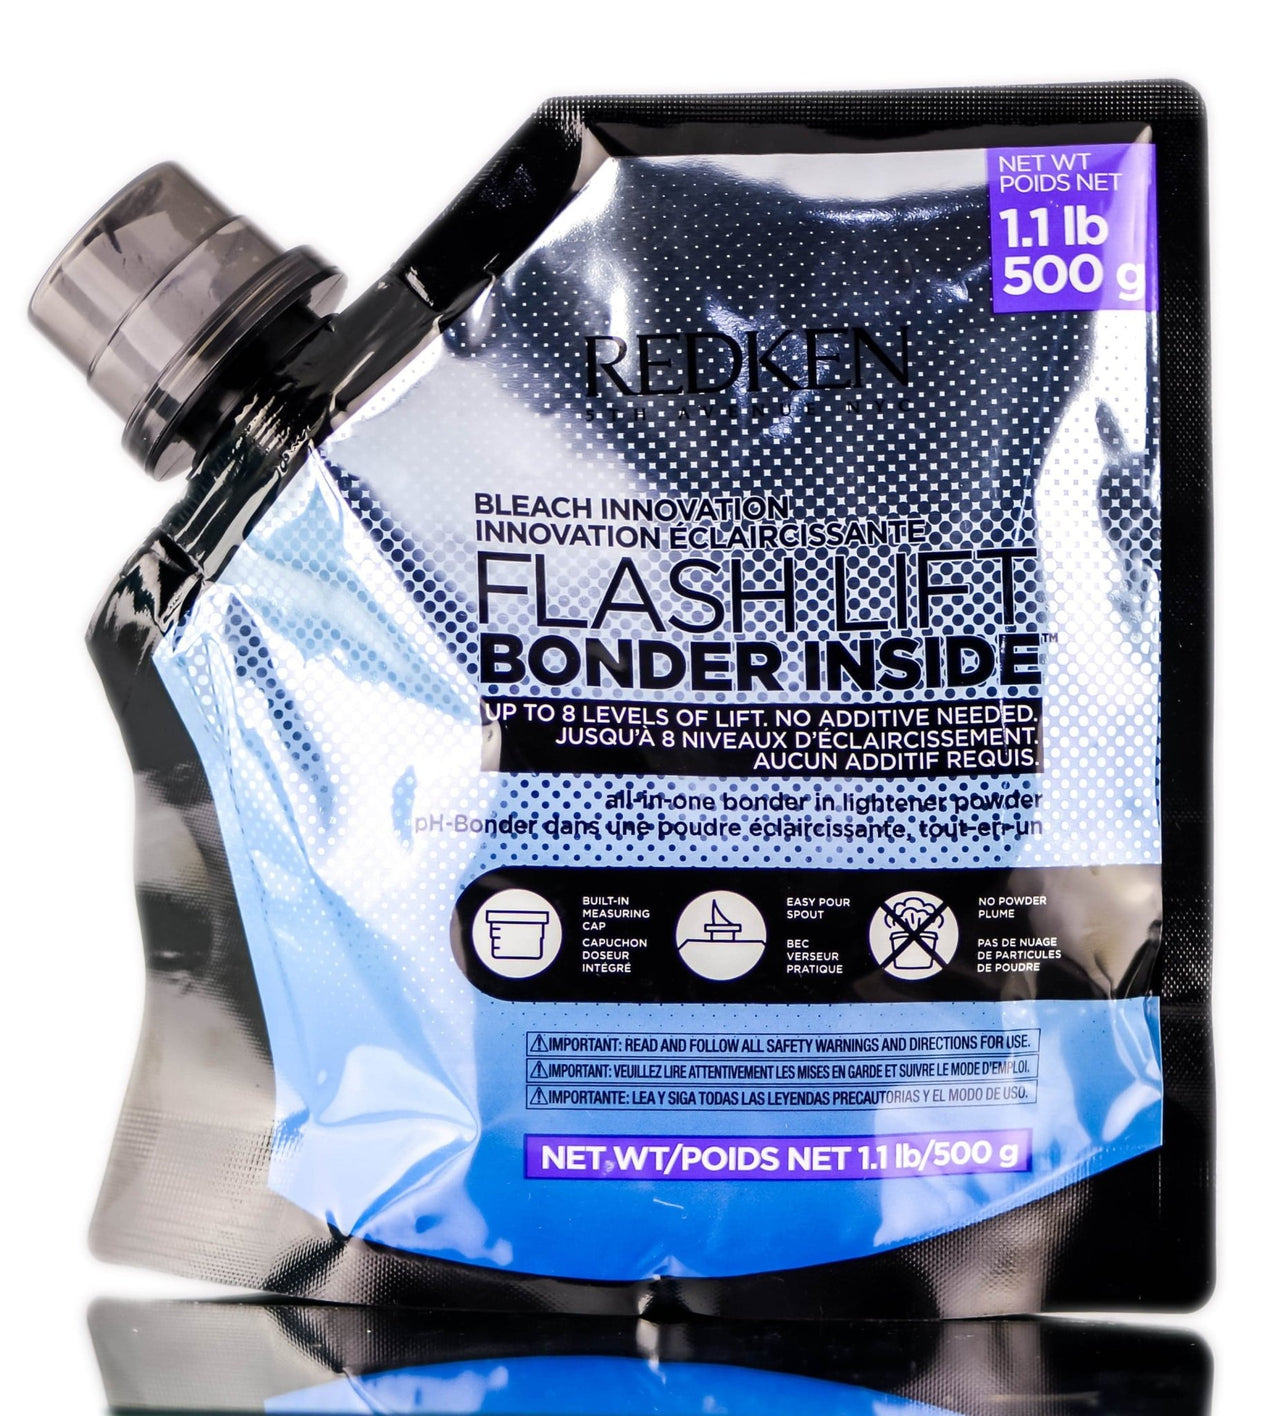 REDKEN_Flash Lift Bonder Inside up to 8 levels of lift 500g_Cosmetic World